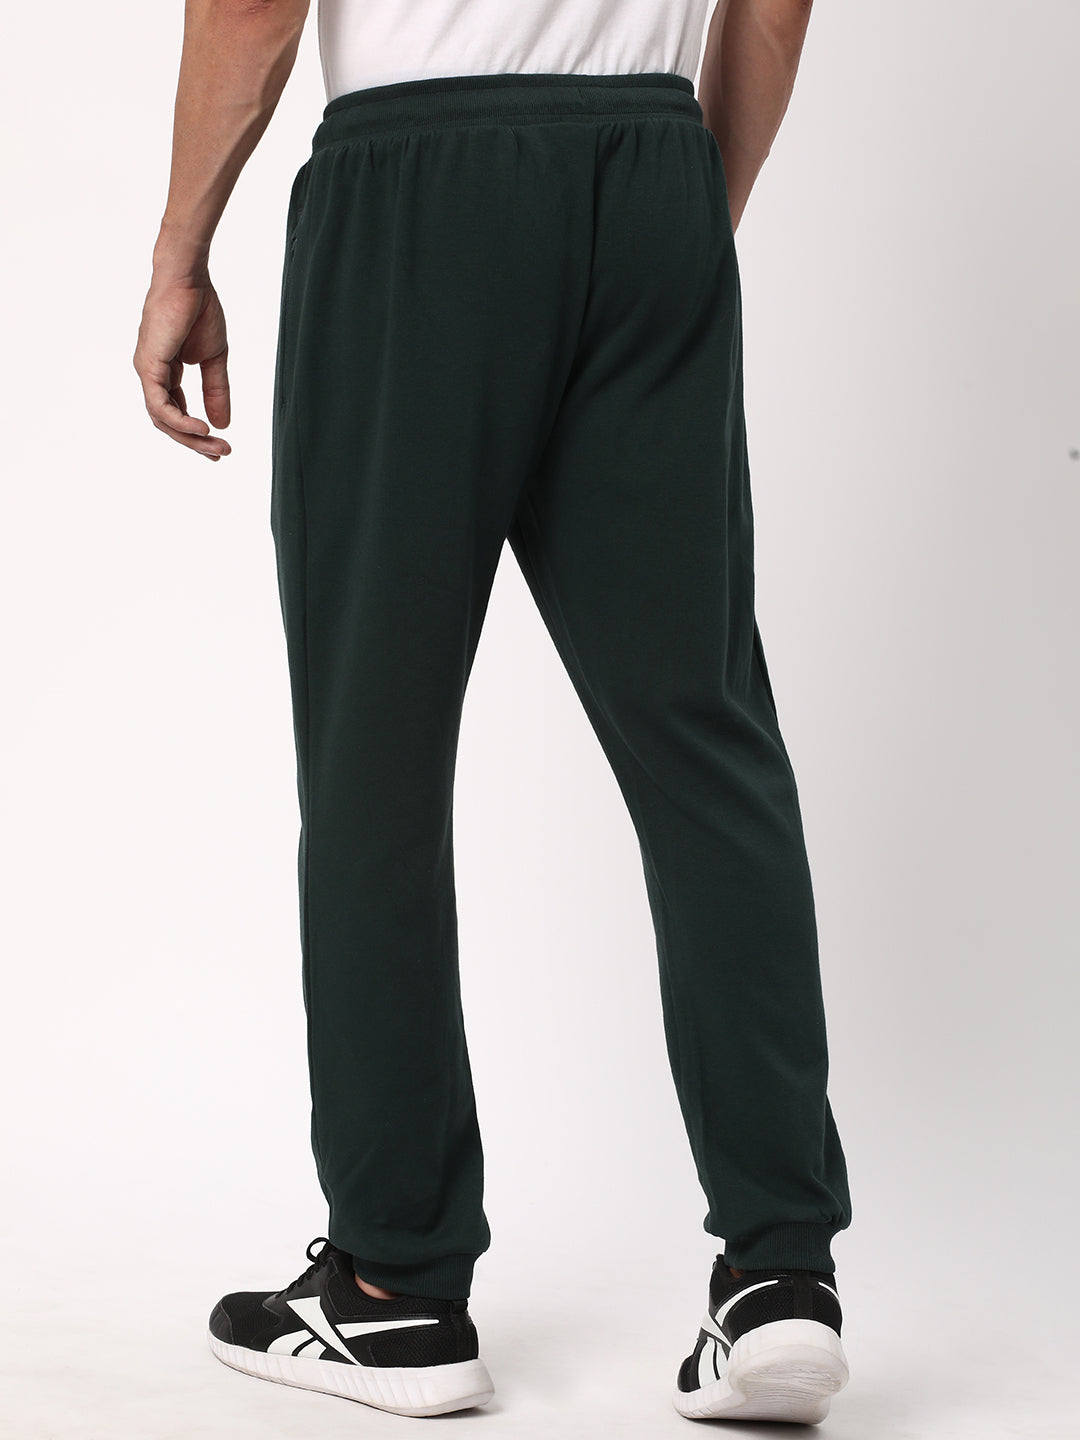 Cotstyle Men's Super Combed Cotton Slim-Fit Casual Joggers with Zipper Pockets - Green, Style no.JR1200